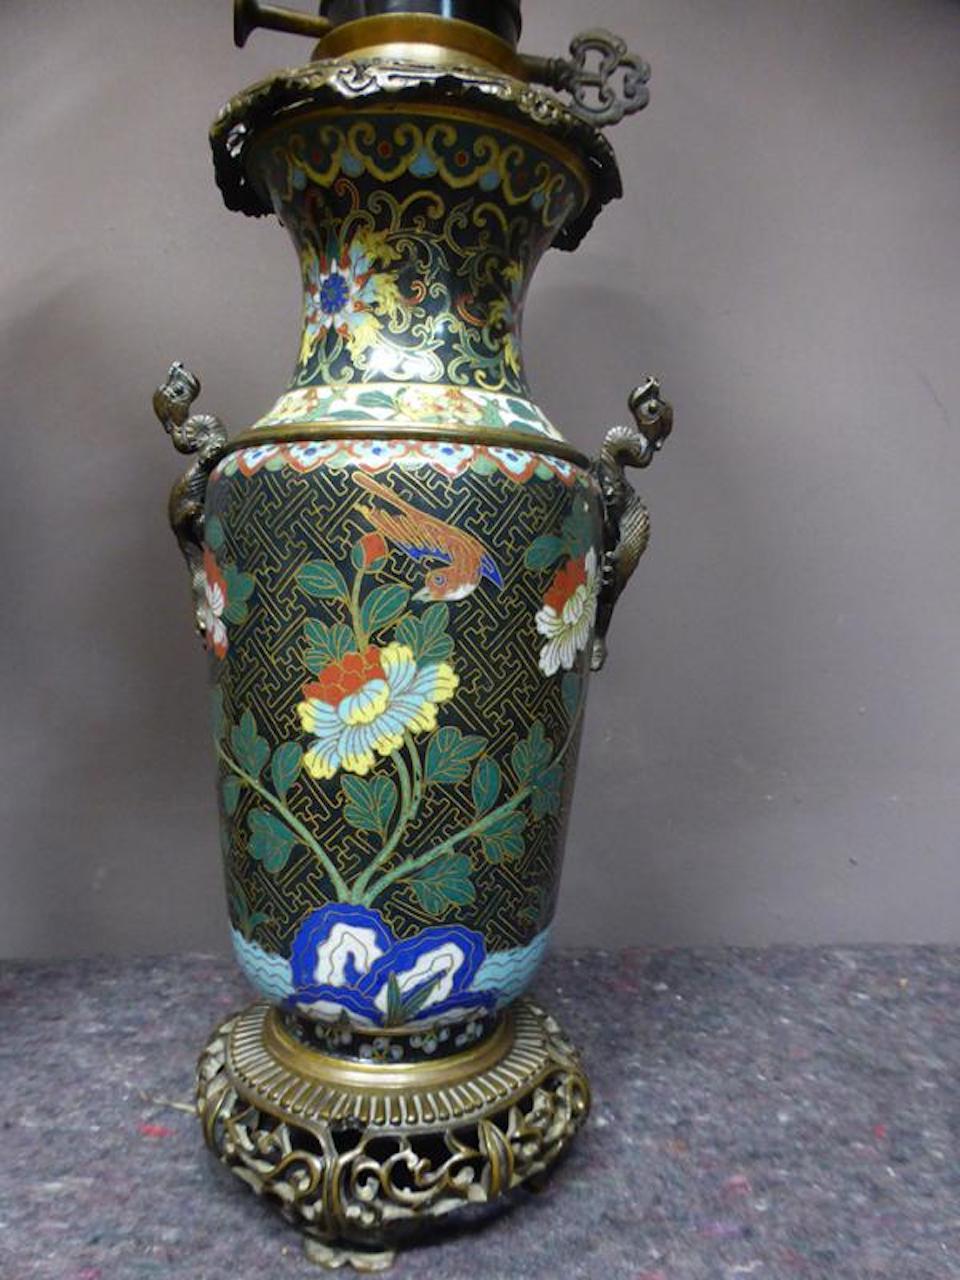 19th century Pair of enamel lamps finely cloisonné plant pattern on a black background. The gilt bronze feet are openwork, the shoulders are decorated with small bronze dragons rising on the vases.